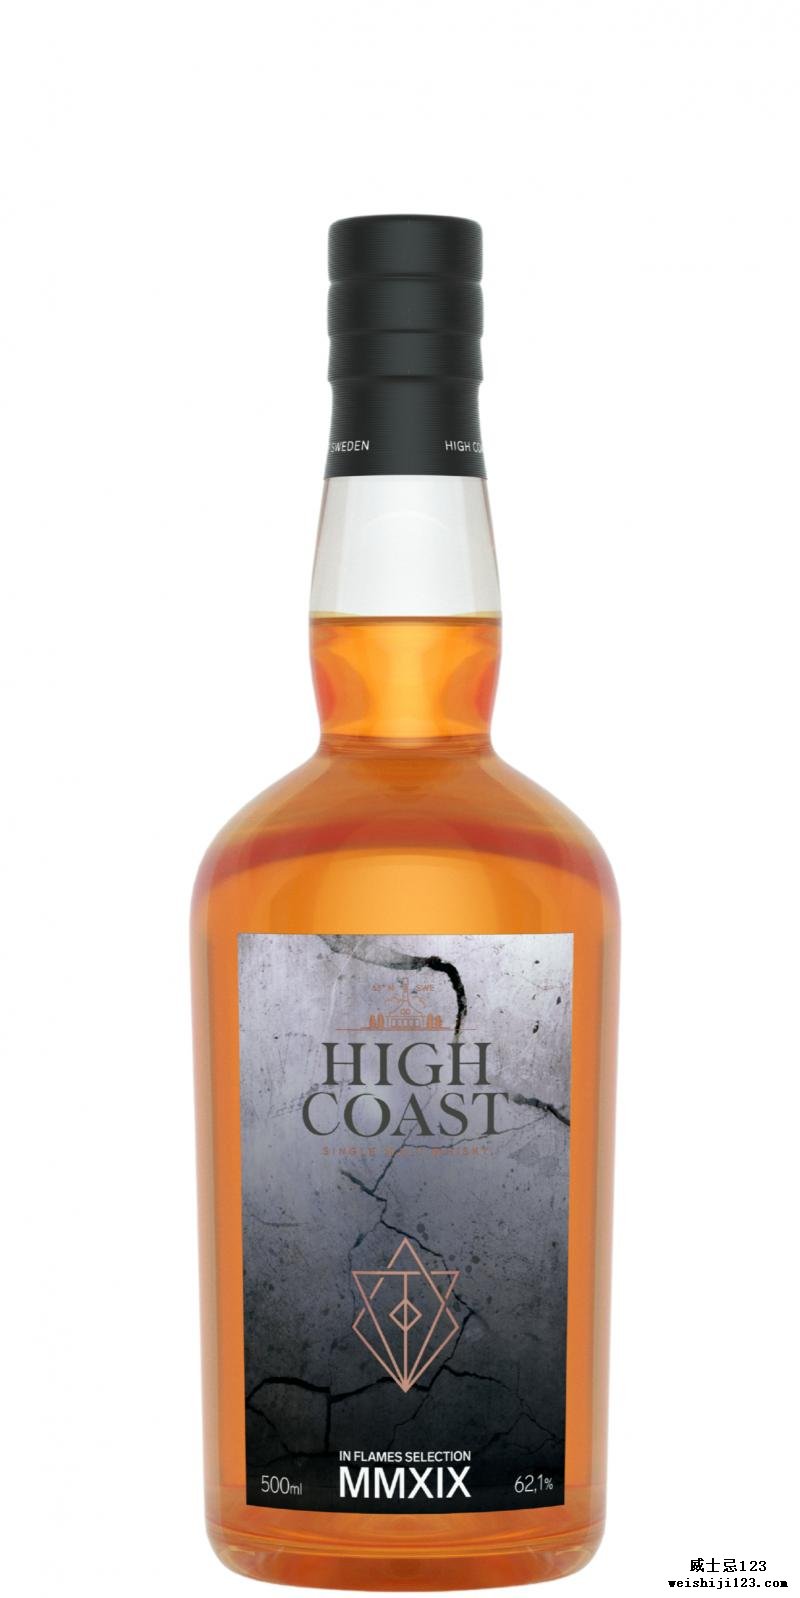 High Coast In Flames Selection MMXIX